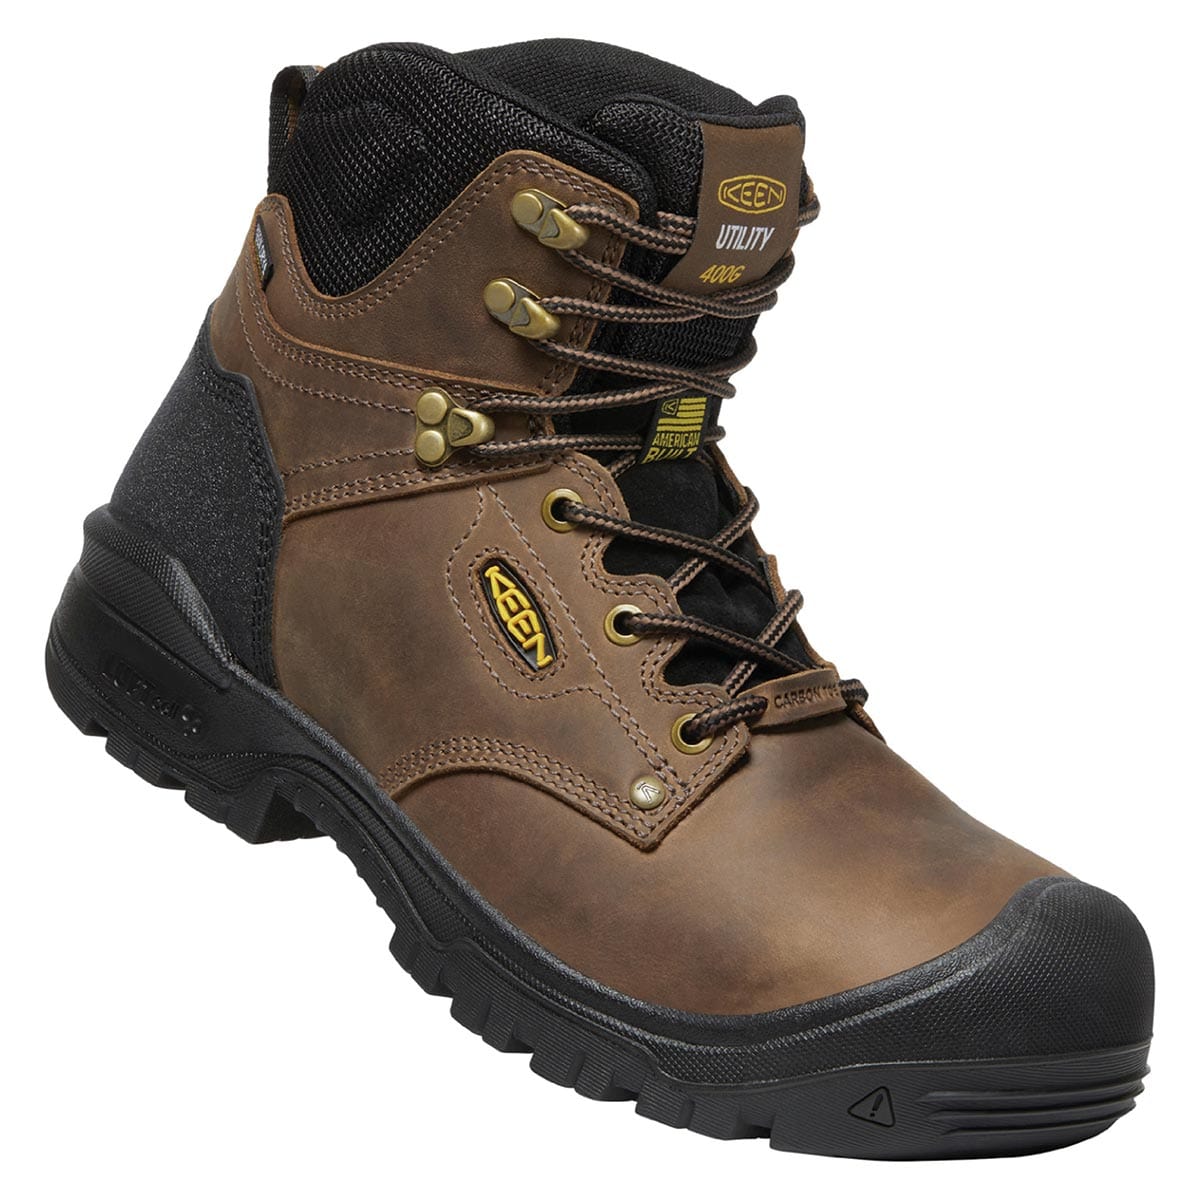 KEEN Utility Independence 6" Insulated Waterproof Boots